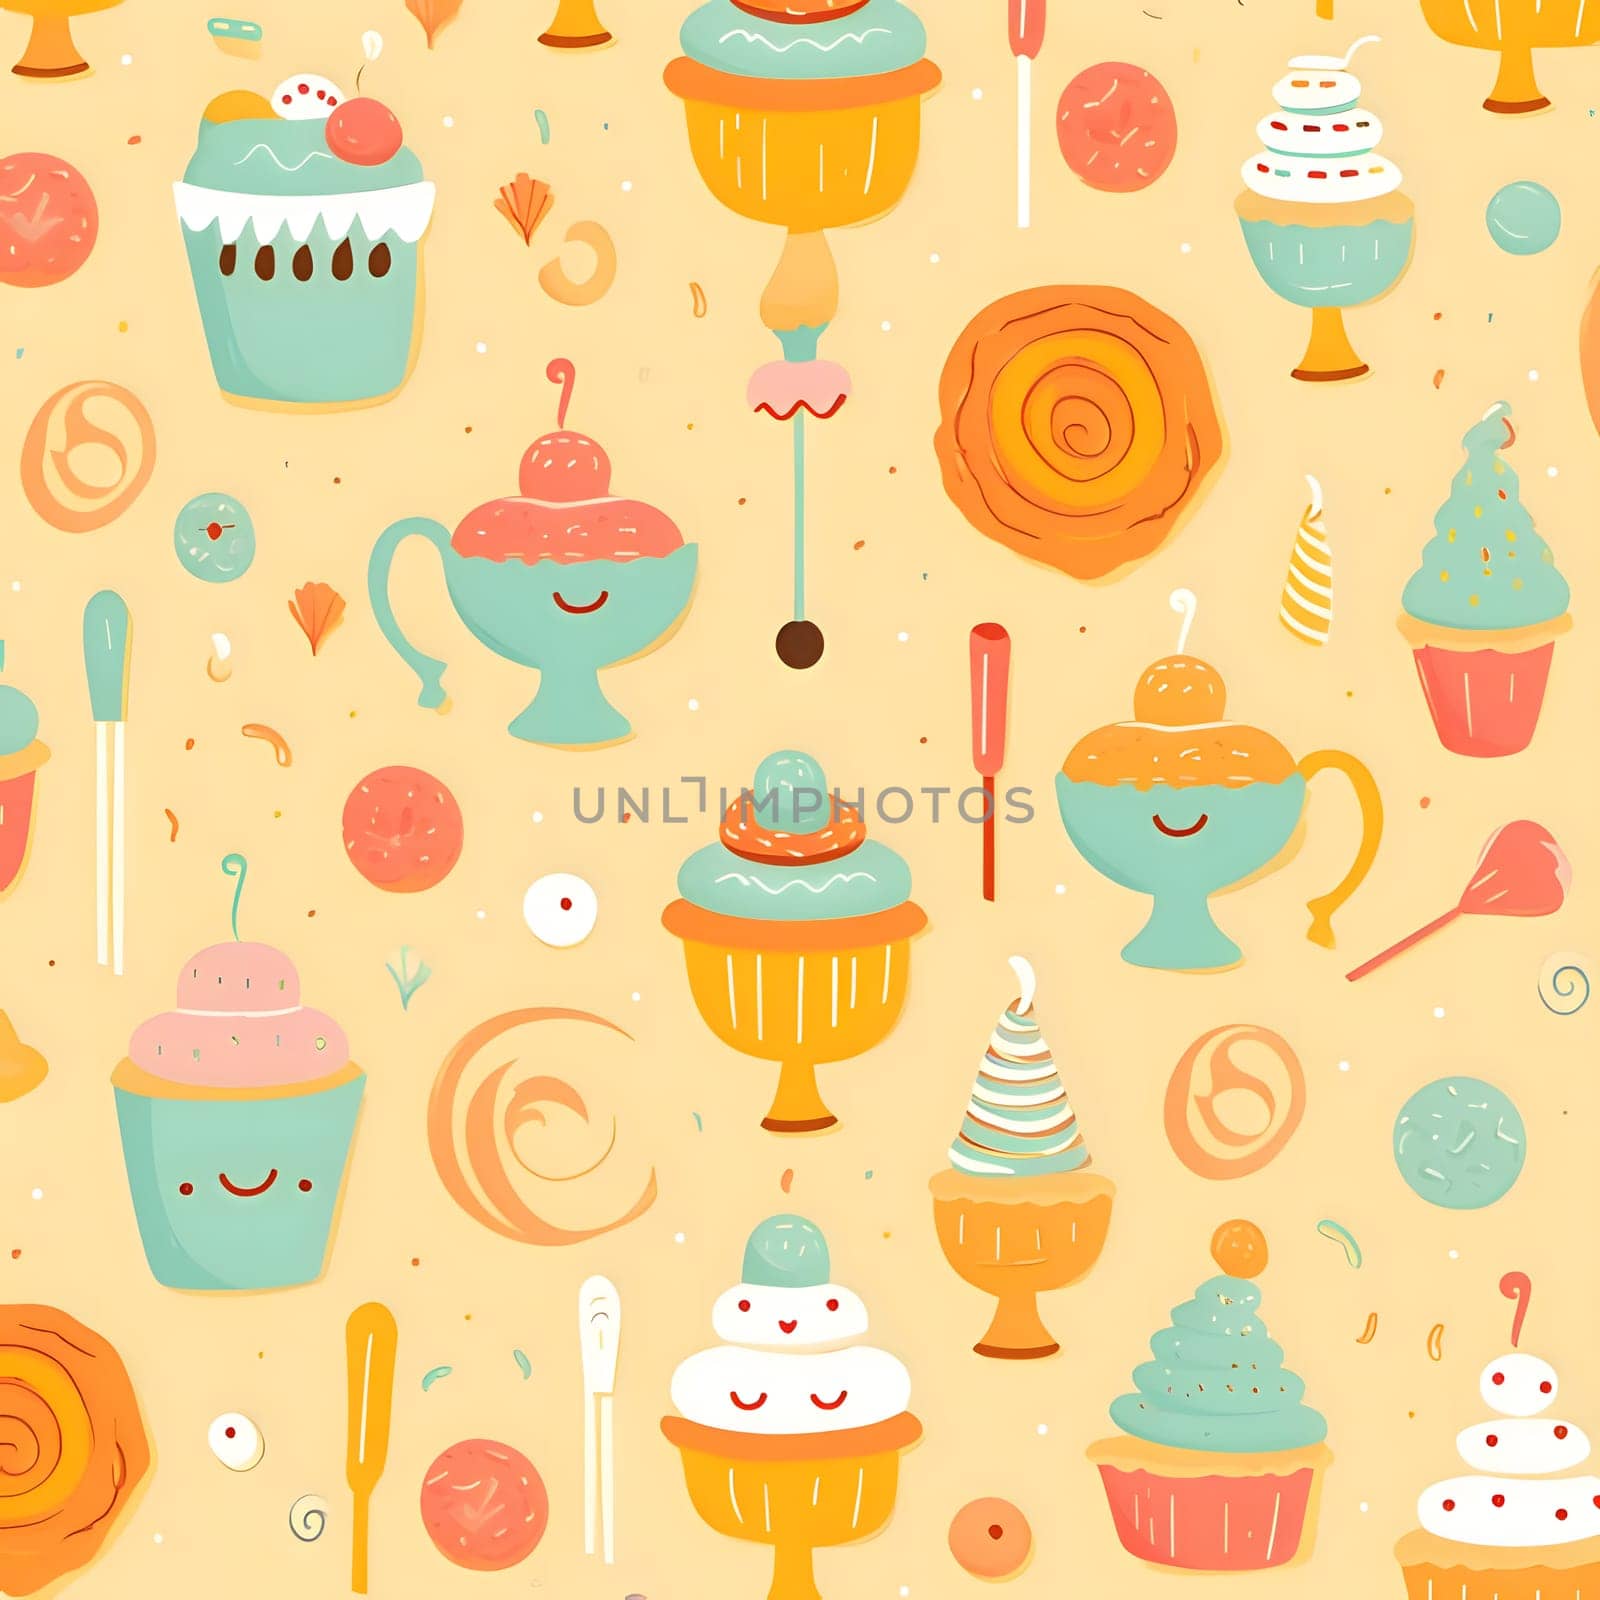 Patterns and banners backgrounds: Seamless pattern with cupcakes, lollipops, ice cream and other sweets.